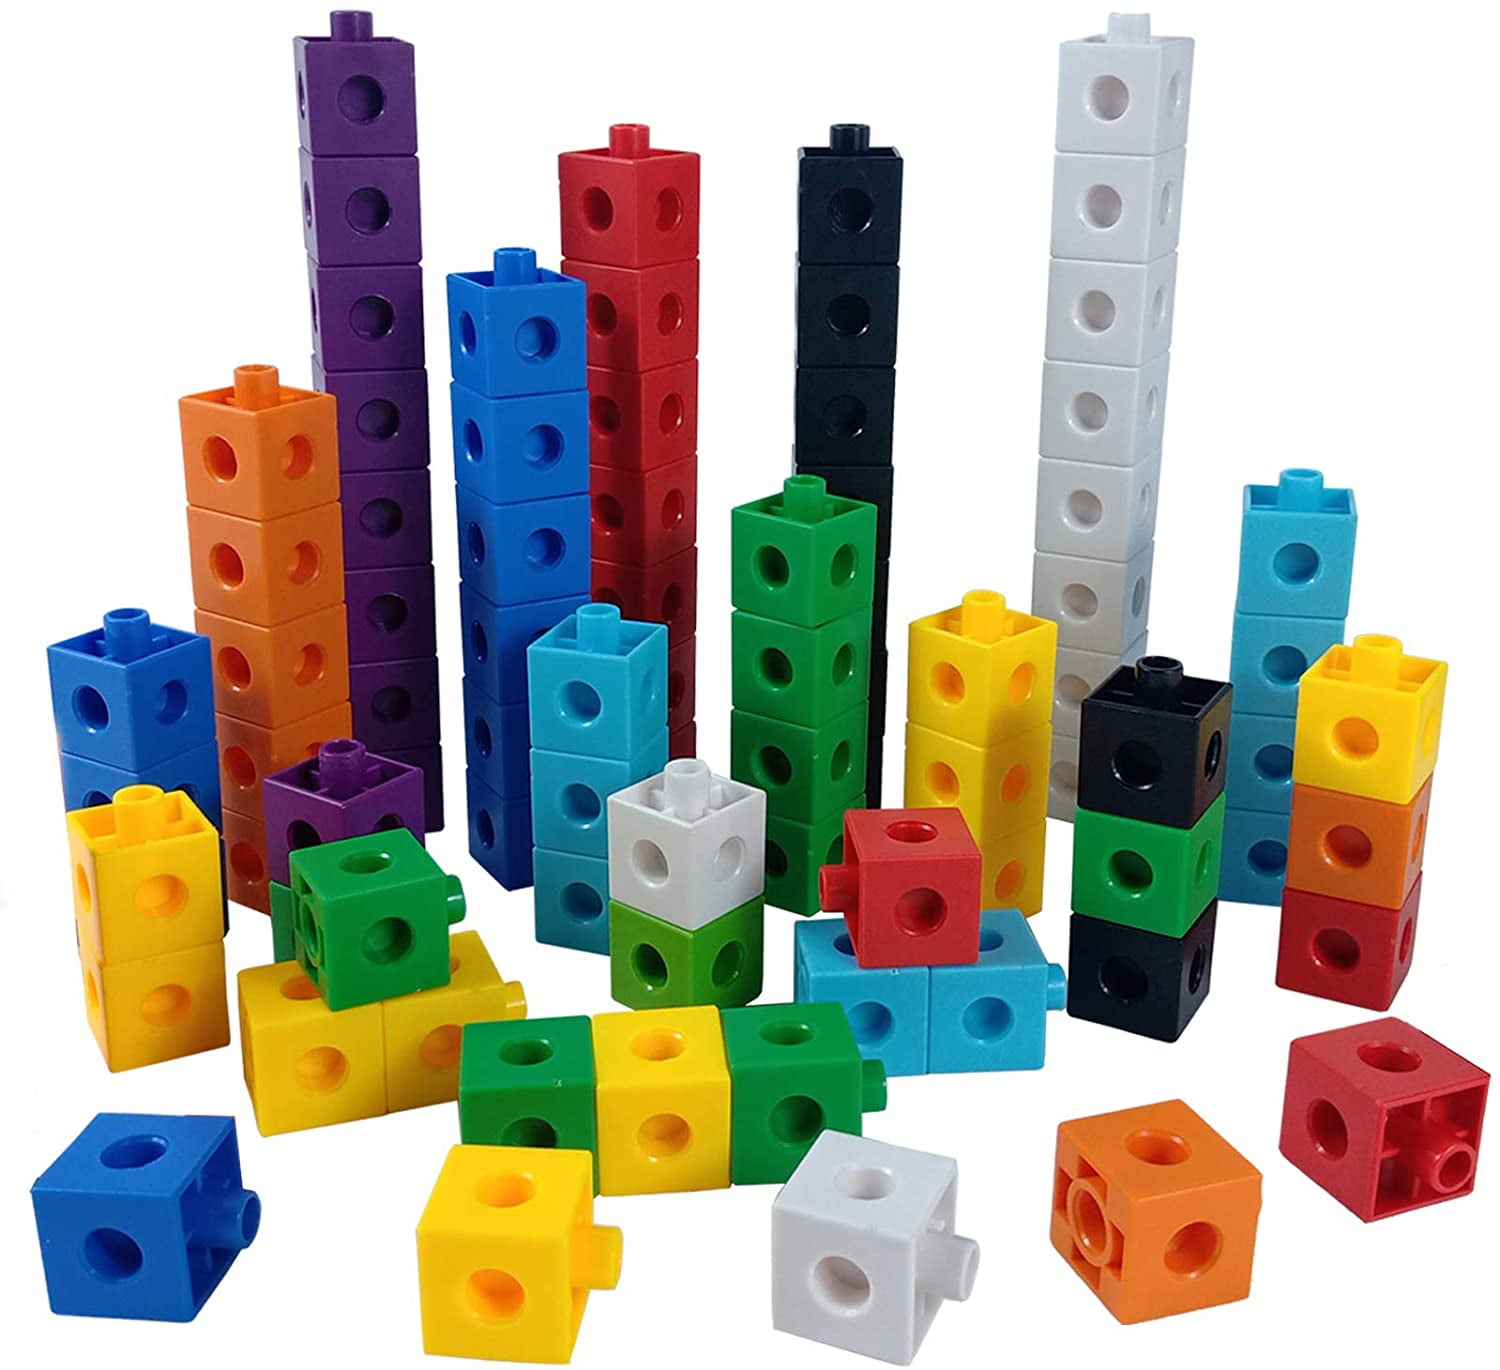 Building Block Cube Set- 100 Piece Colorful Plastic Snap Cubes for  Educational Fun and STEM Learning for Boys and Girls by Hey! Play!